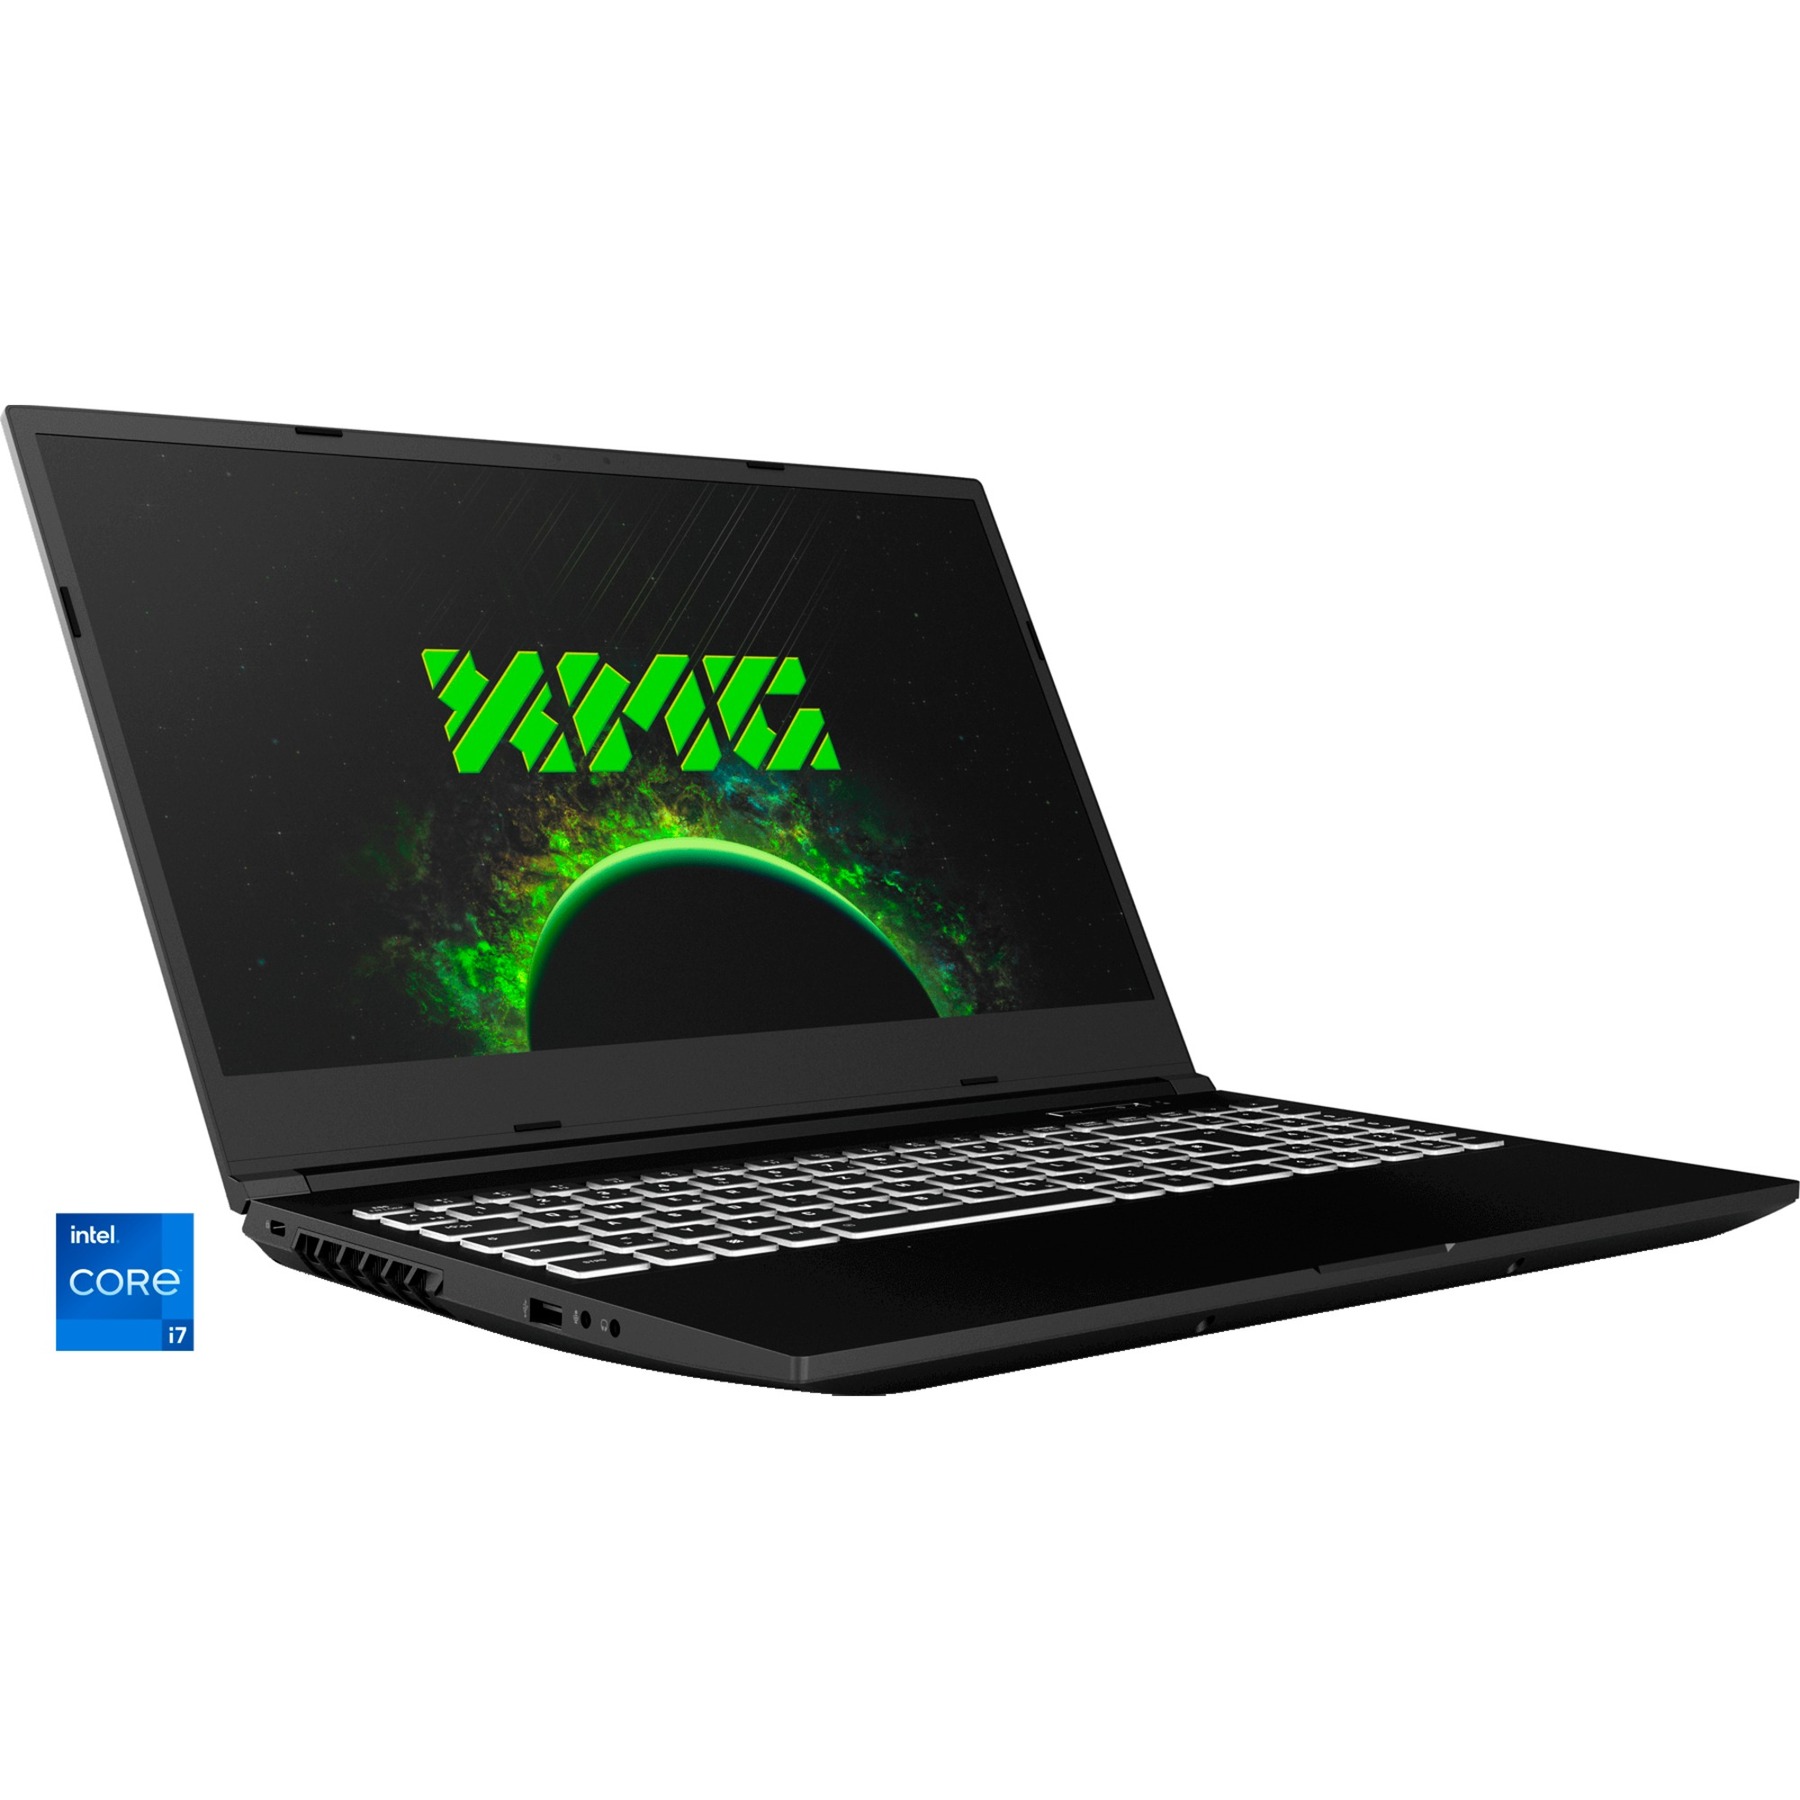 CORE 15 (10505854), Gaming-Notebook